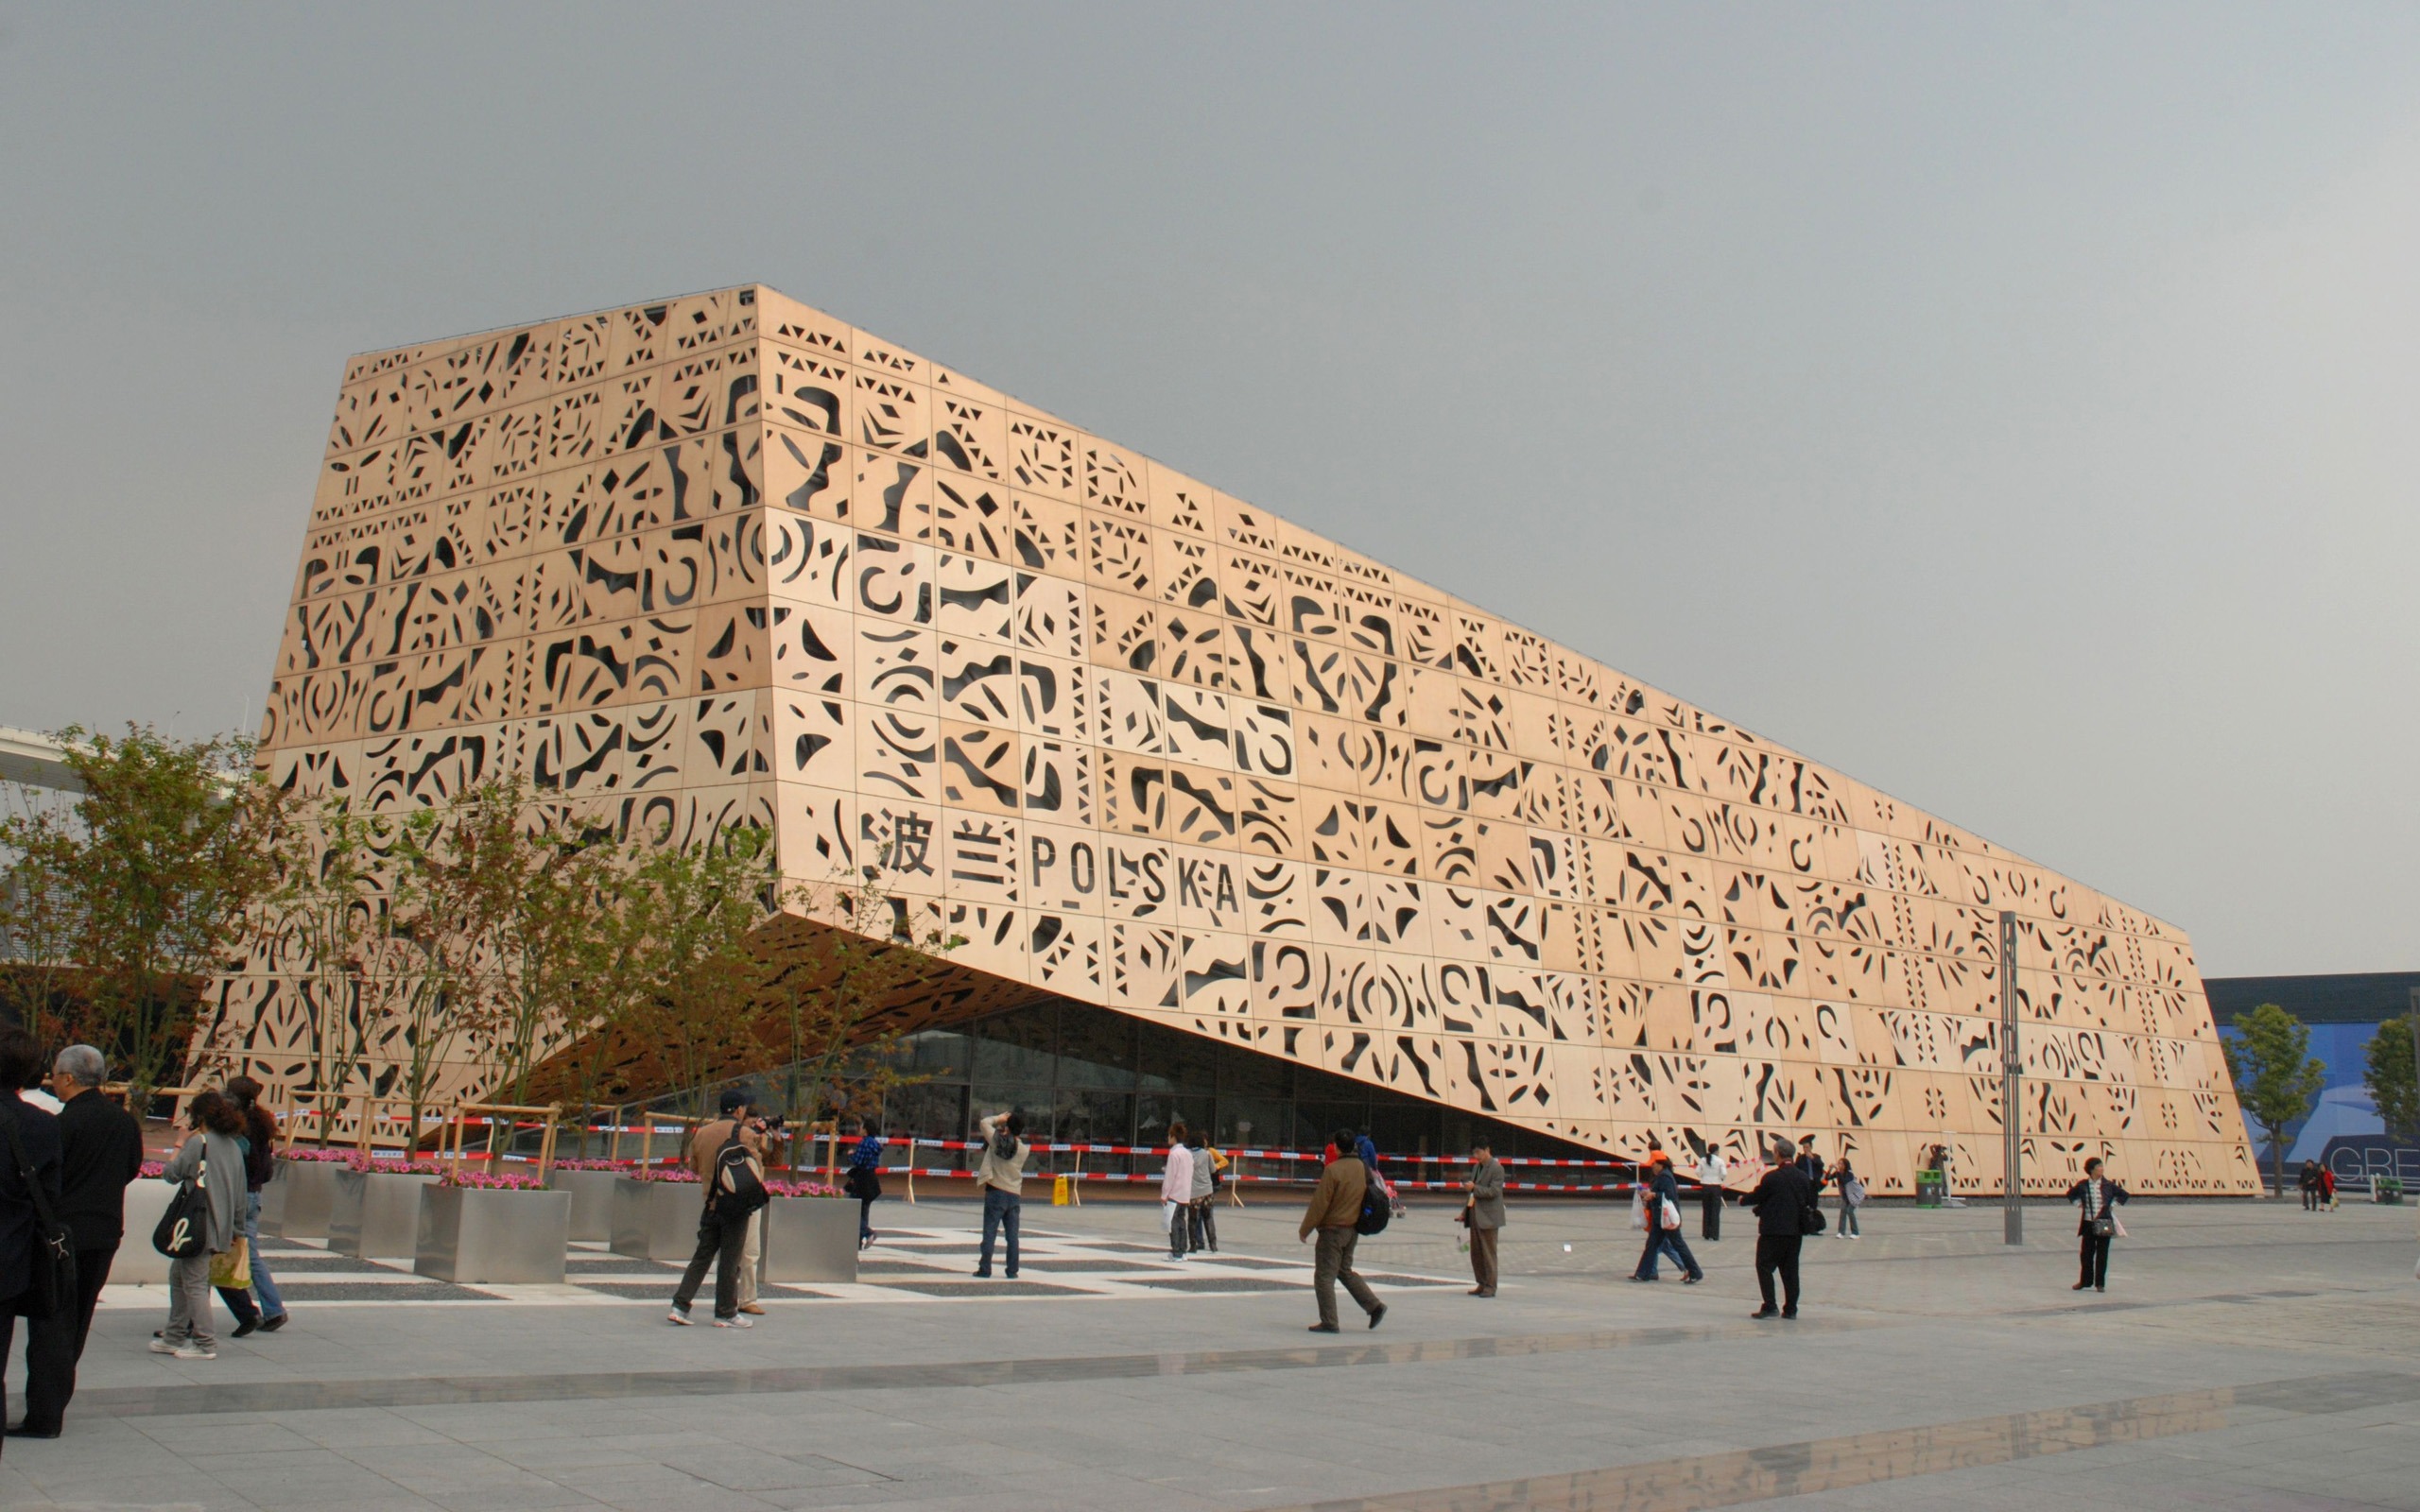 Commissioning of the 2010 Shanghai World Expo (studious works) #25 - 2560x1600